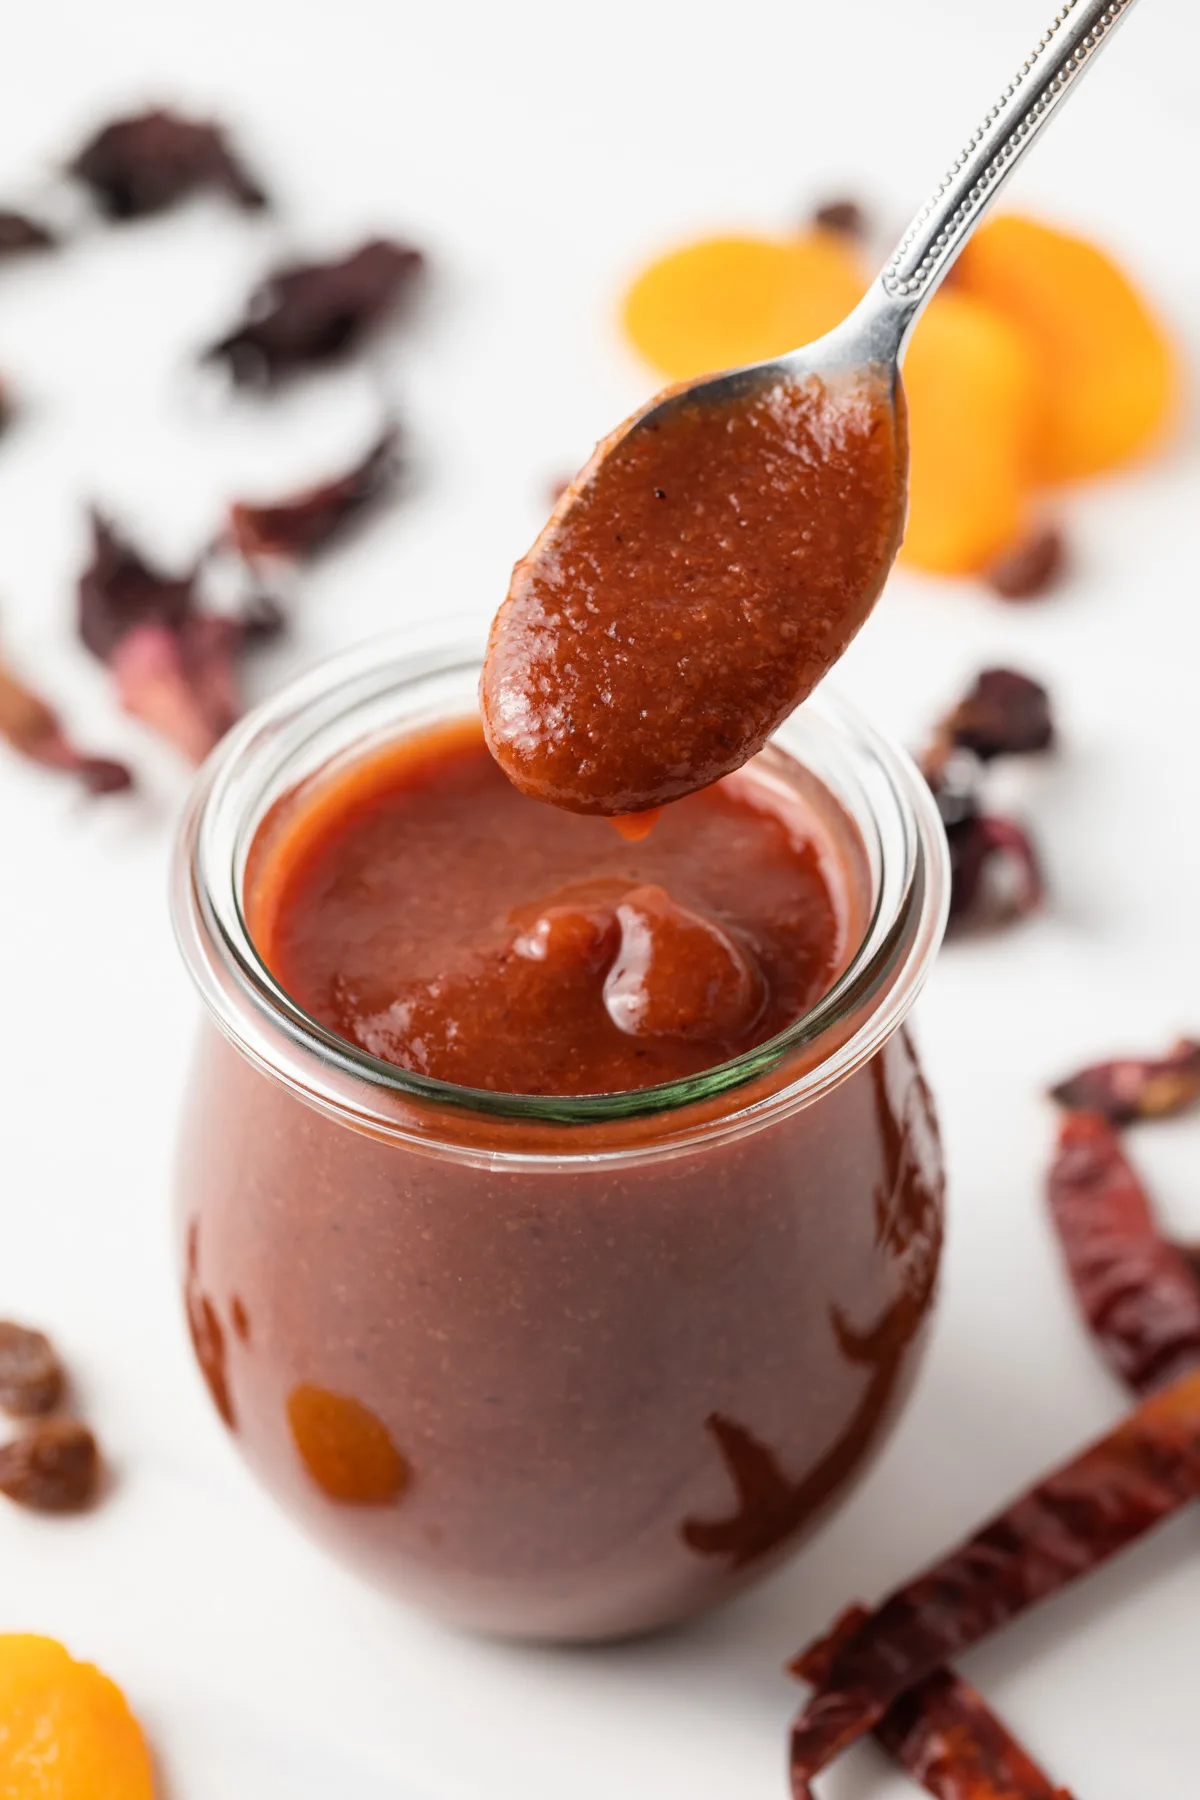 Chamoy sauce spooned out of a jar.